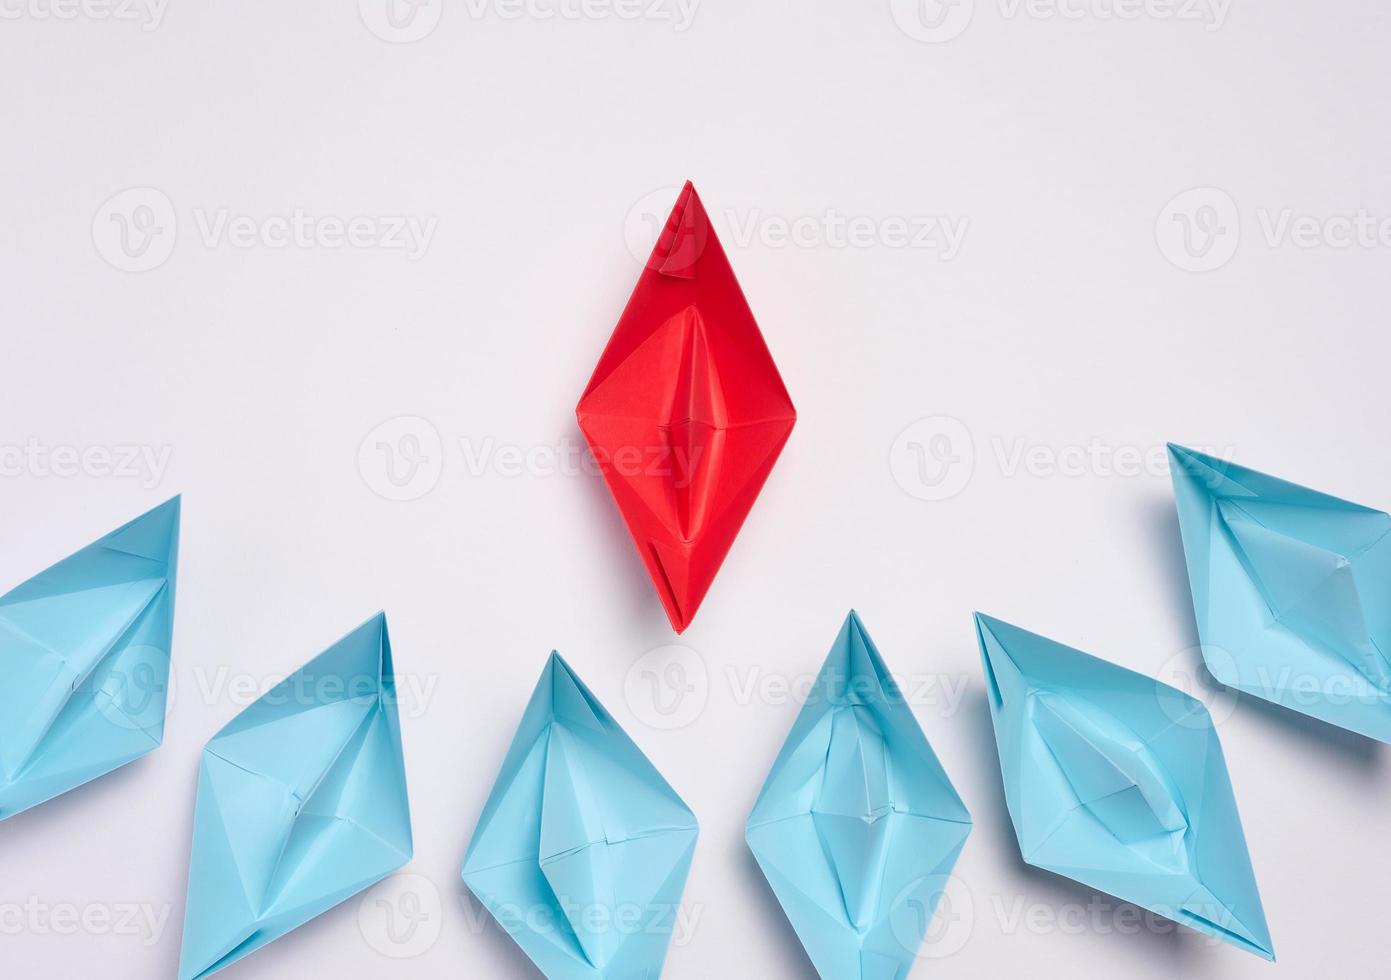 A group of blue paper boats surrounded one red boat, the concept of bullying, search for compromise. Top view photo